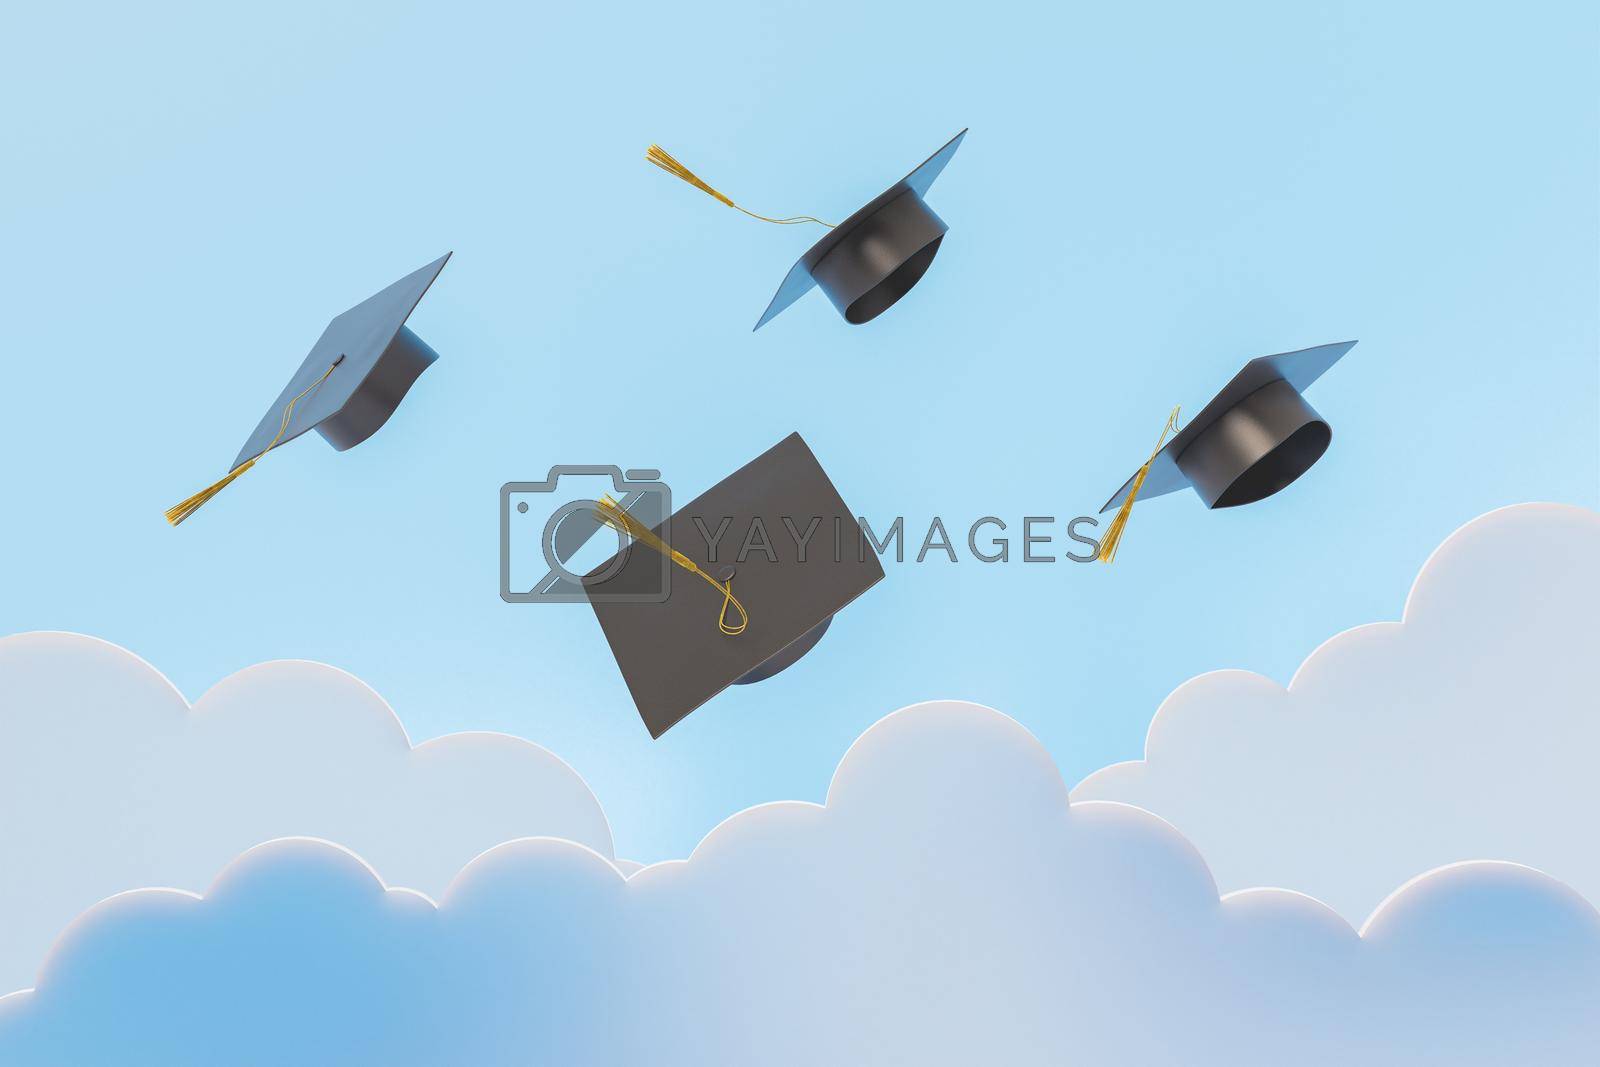 Royalty free image of Painted academic caps in sky by asolano